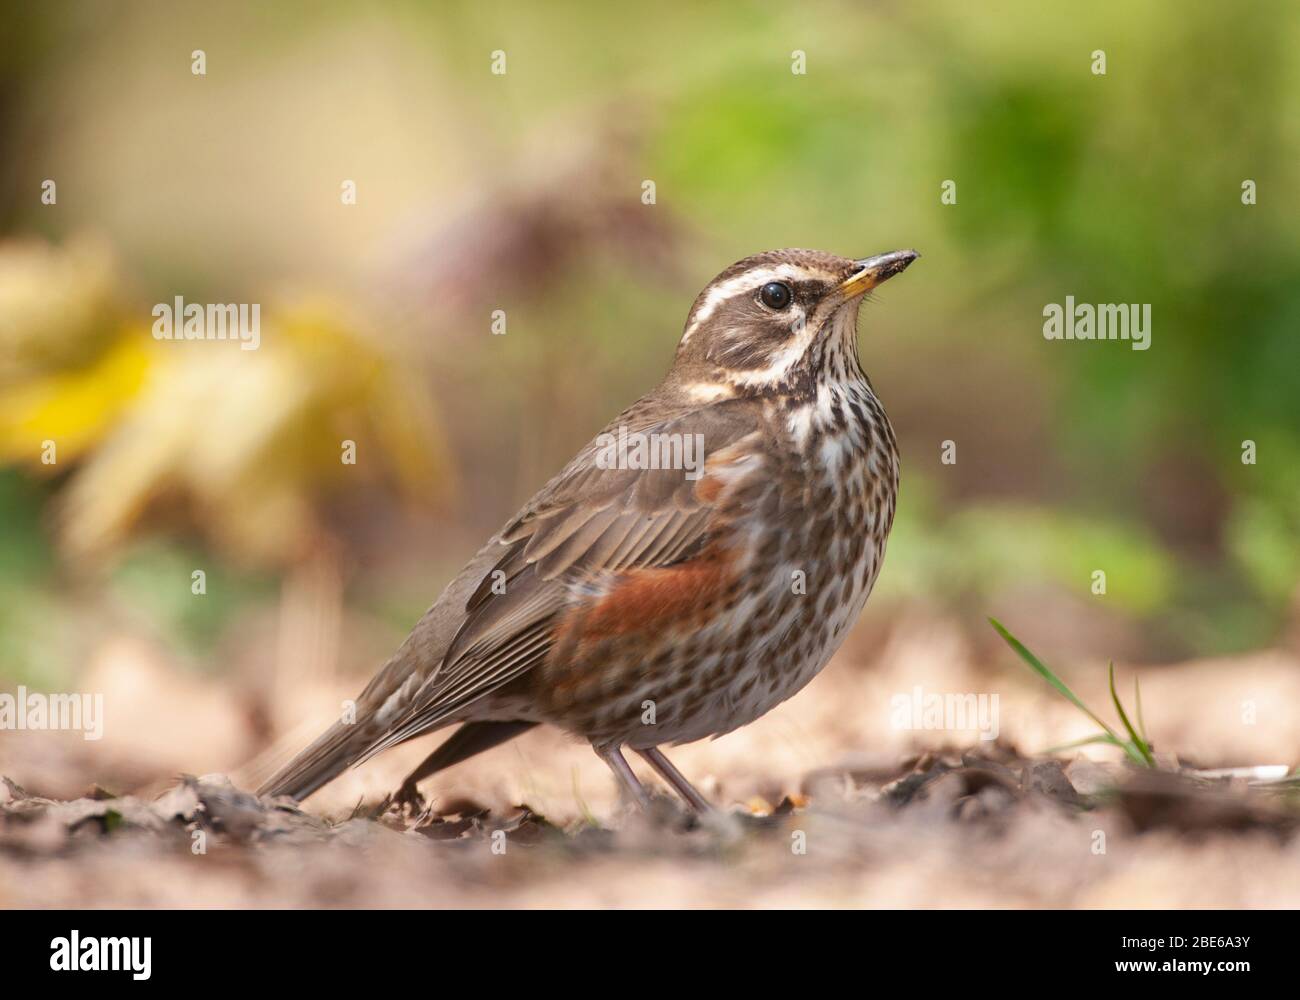 Adult Redwing, Turdus iliacus, foraging on ground, Queen's Park, , London, United Kingdom Stock Photo